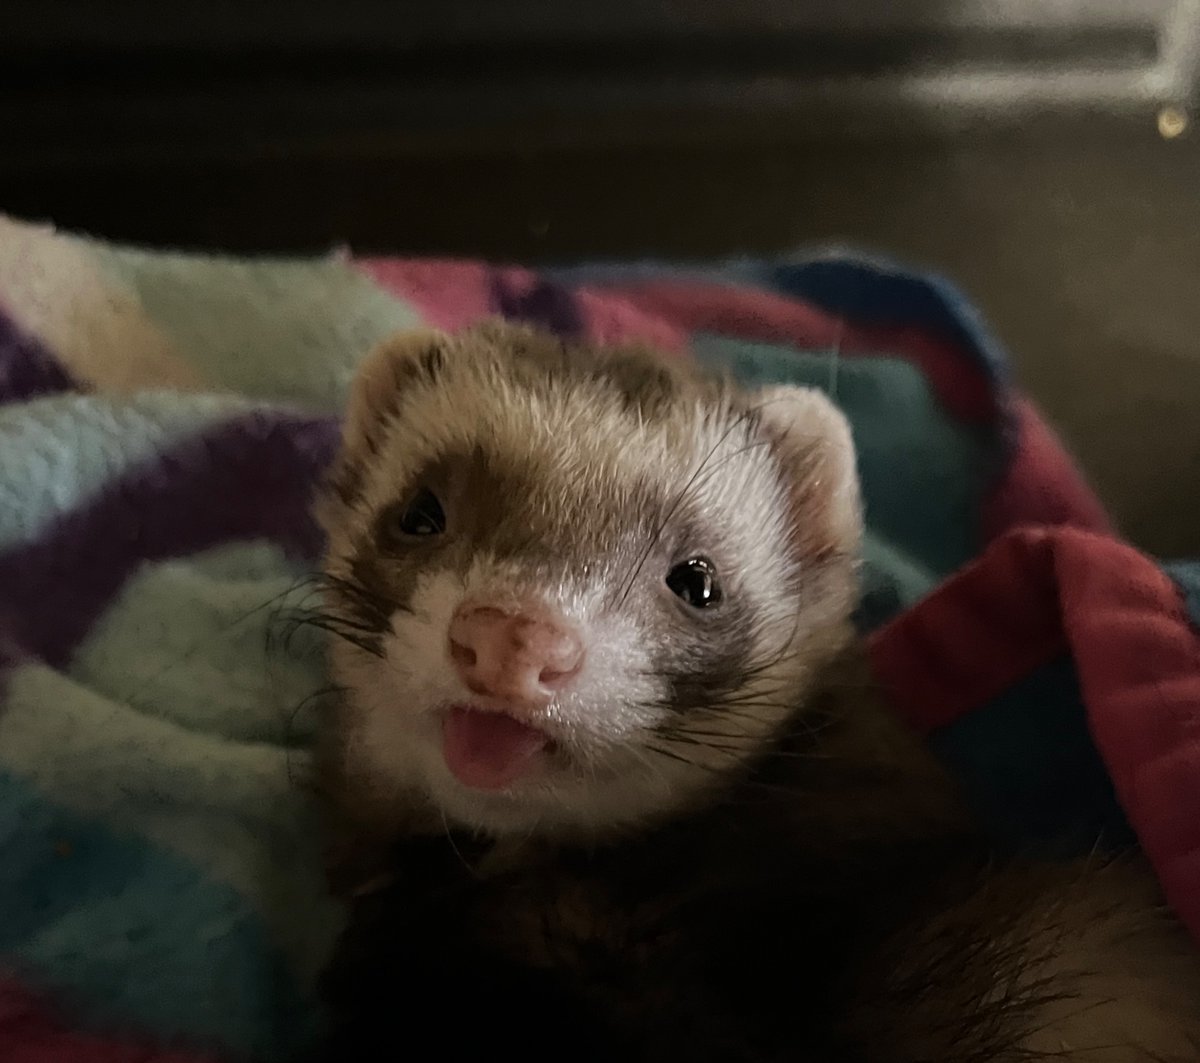 Tongue out Thursday! ⁣
.
#animal #animals #cuteanimals #cuteferrets #cutepets #exoticpet #exoticpets #ferrets #funnyferret #funnypet #furbabies #girlythings #instaanimal #instapet #petgram #petlove #pets #petsagram #petsofig #petsofinstagram #smallanimal #tongueouttuesday